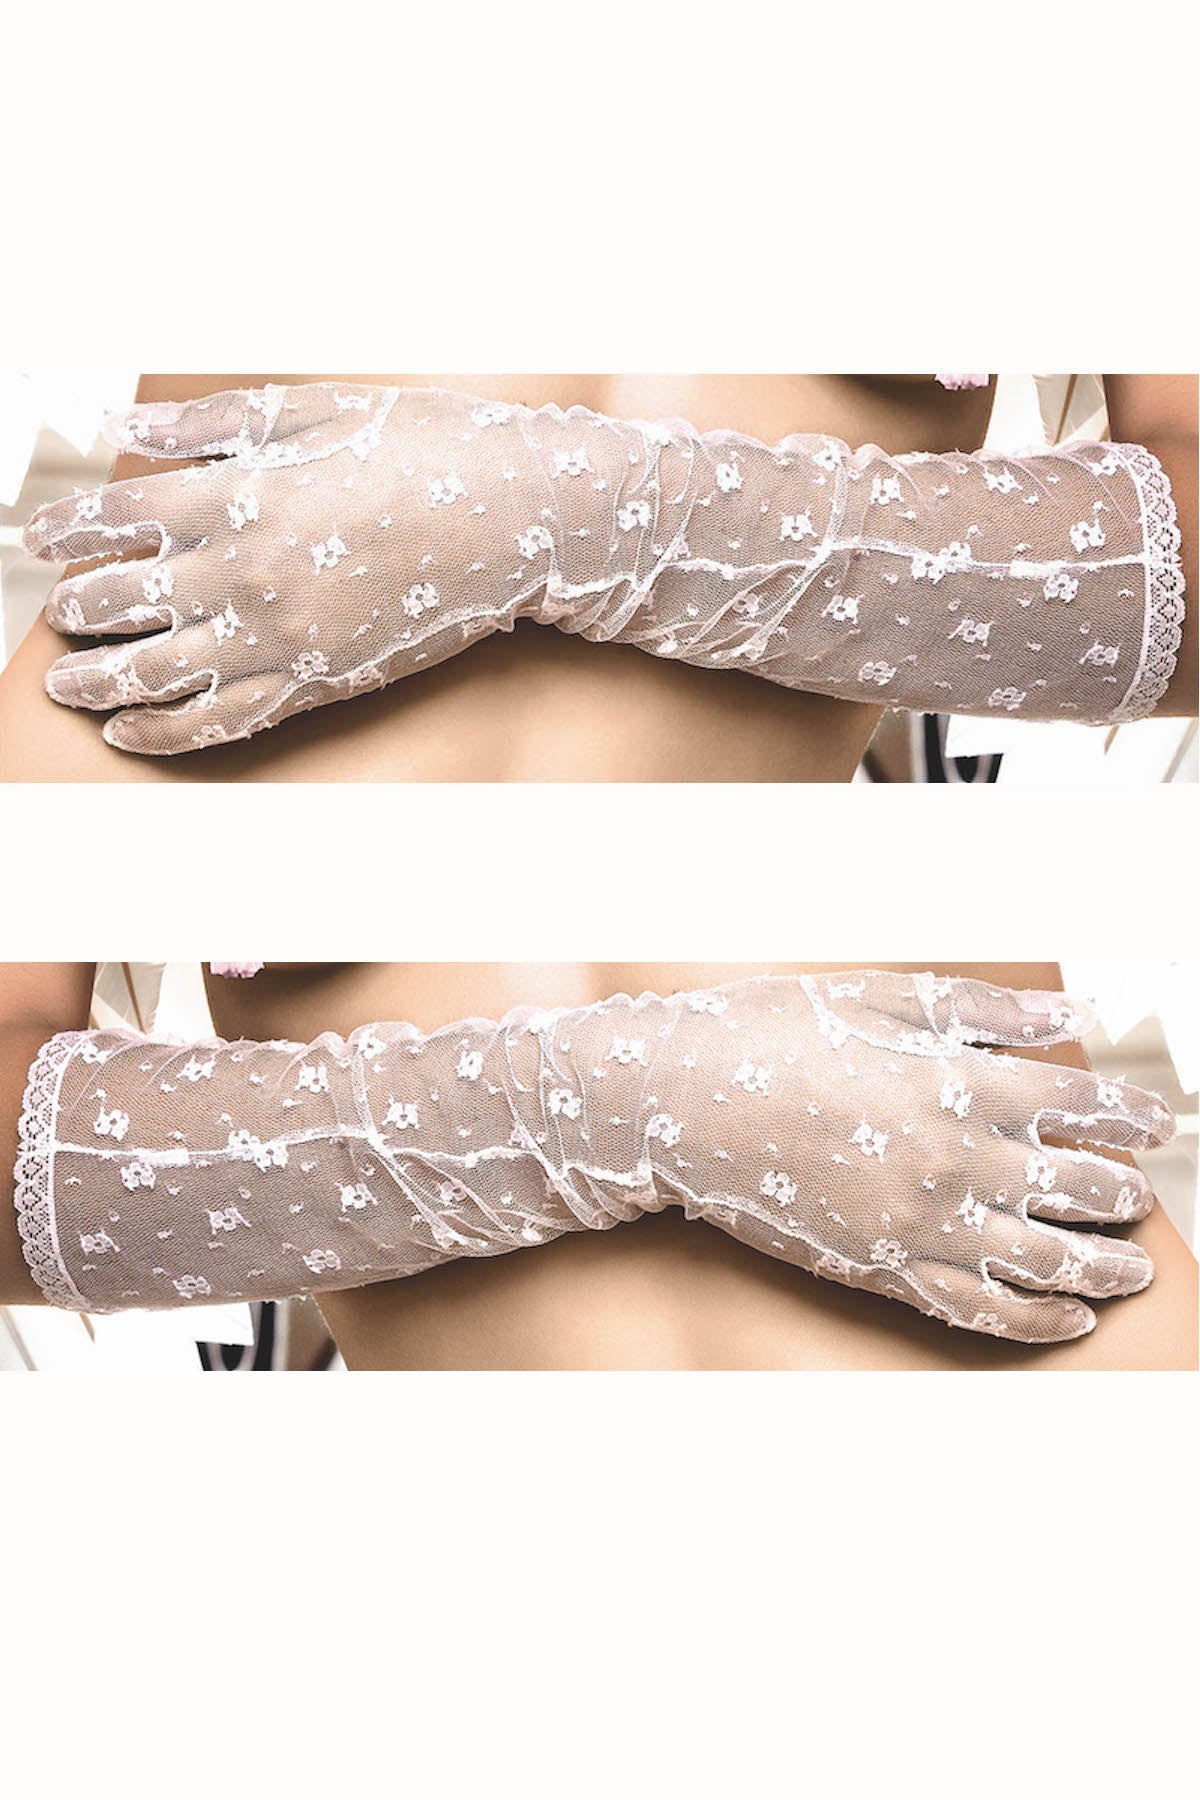 Baci White Lace Evening Gloves